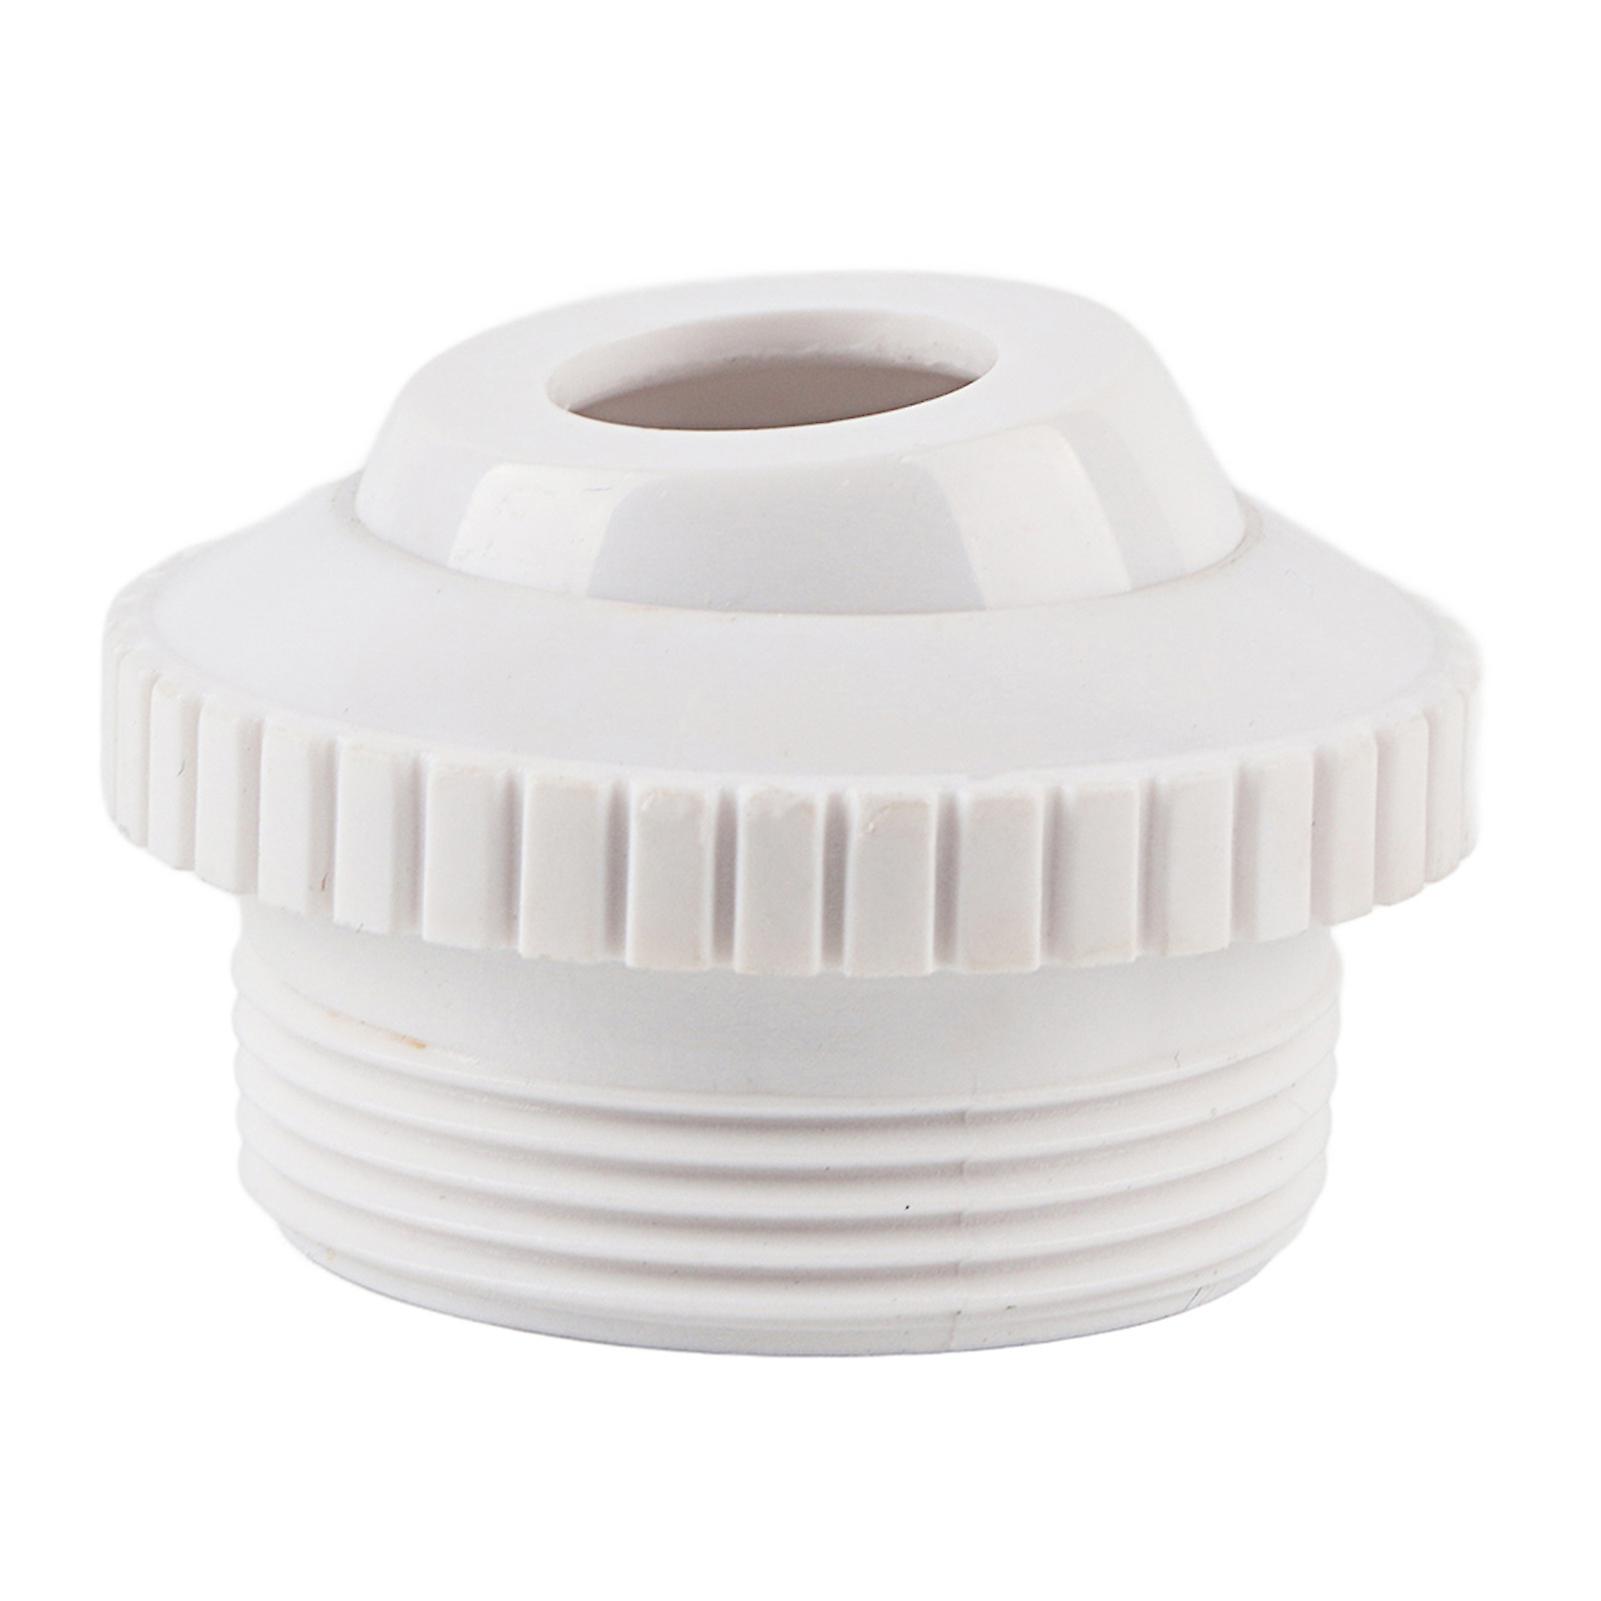 G1-1/2 Dn40 Swimming Pool Spa Water Outlet Nozzle Accessories Fittings For Massage Bathtub